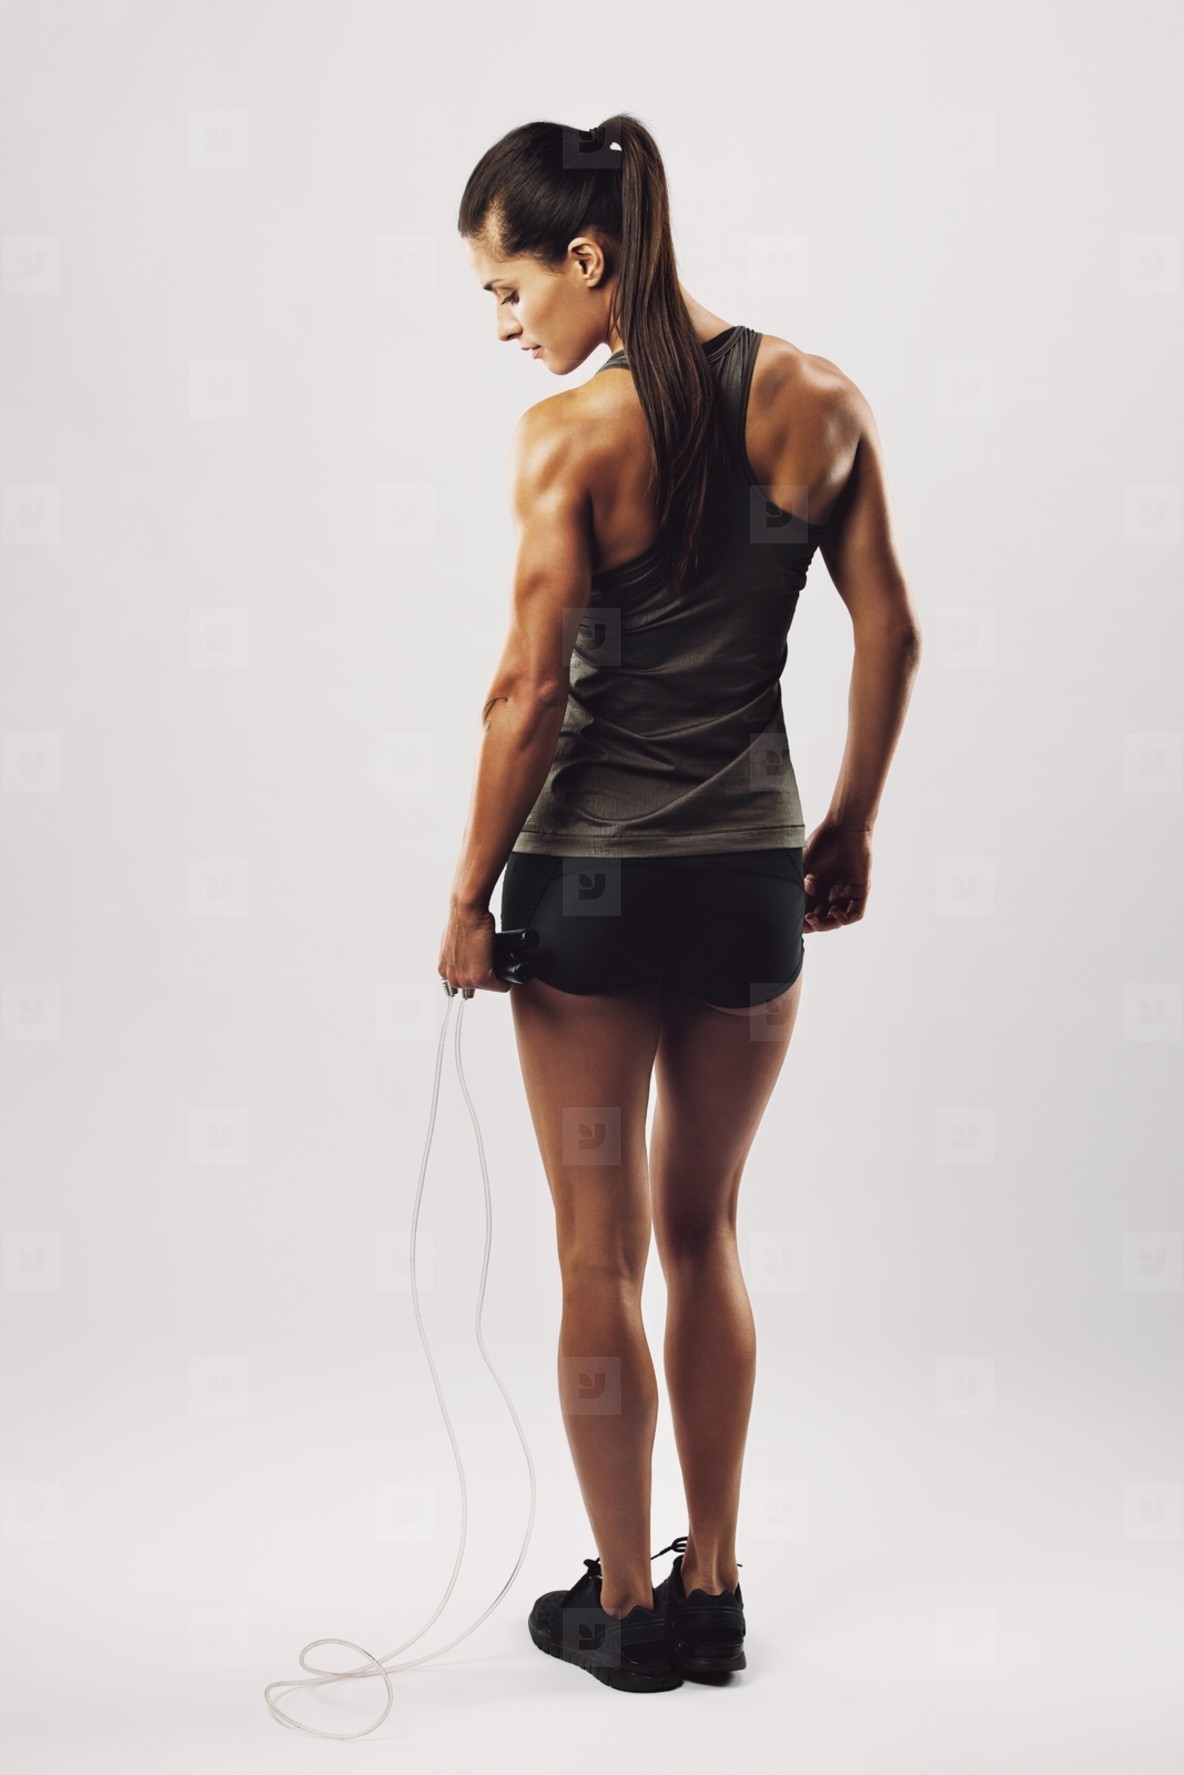 Fit and muscular woman with jumping rope